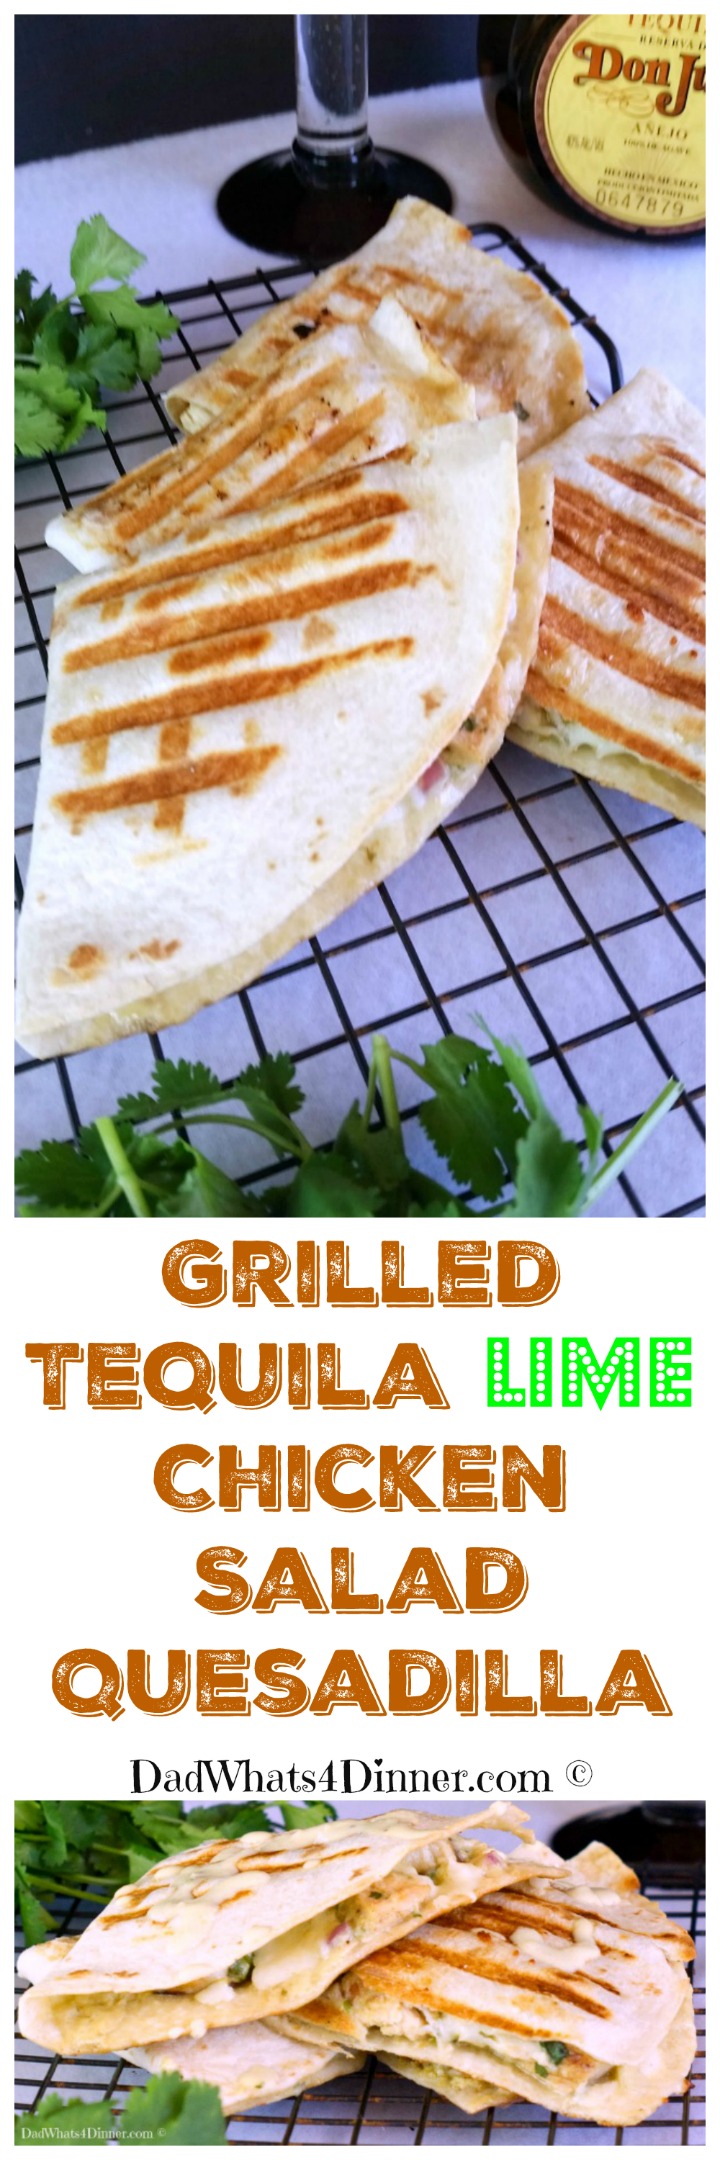 Grilled Tequila Lime Chicken Salad Quesadilla is a fresh south of the border twist on same old chicken salad. Perfect for Cinco de Mayo!